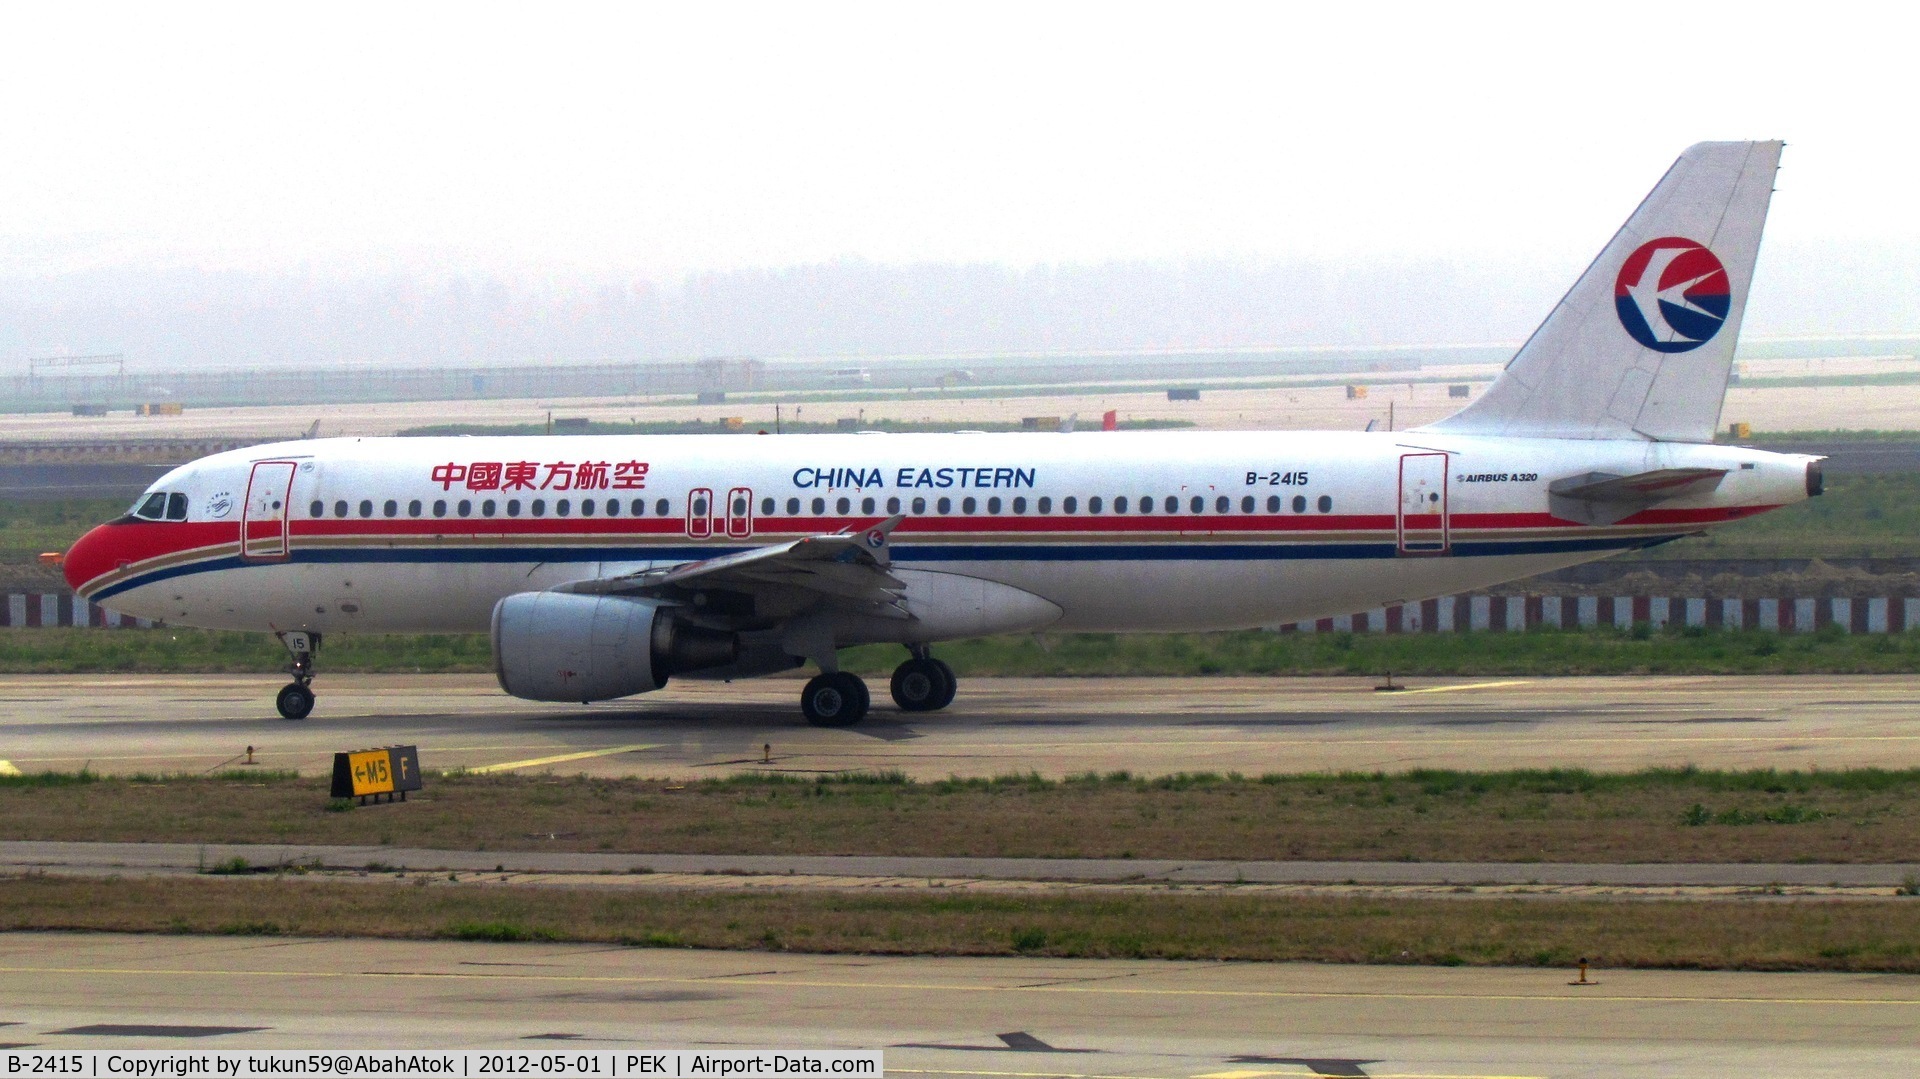 B-2415, 2005 Airbus A320-214 C/N 2498, China Eastern Airlines